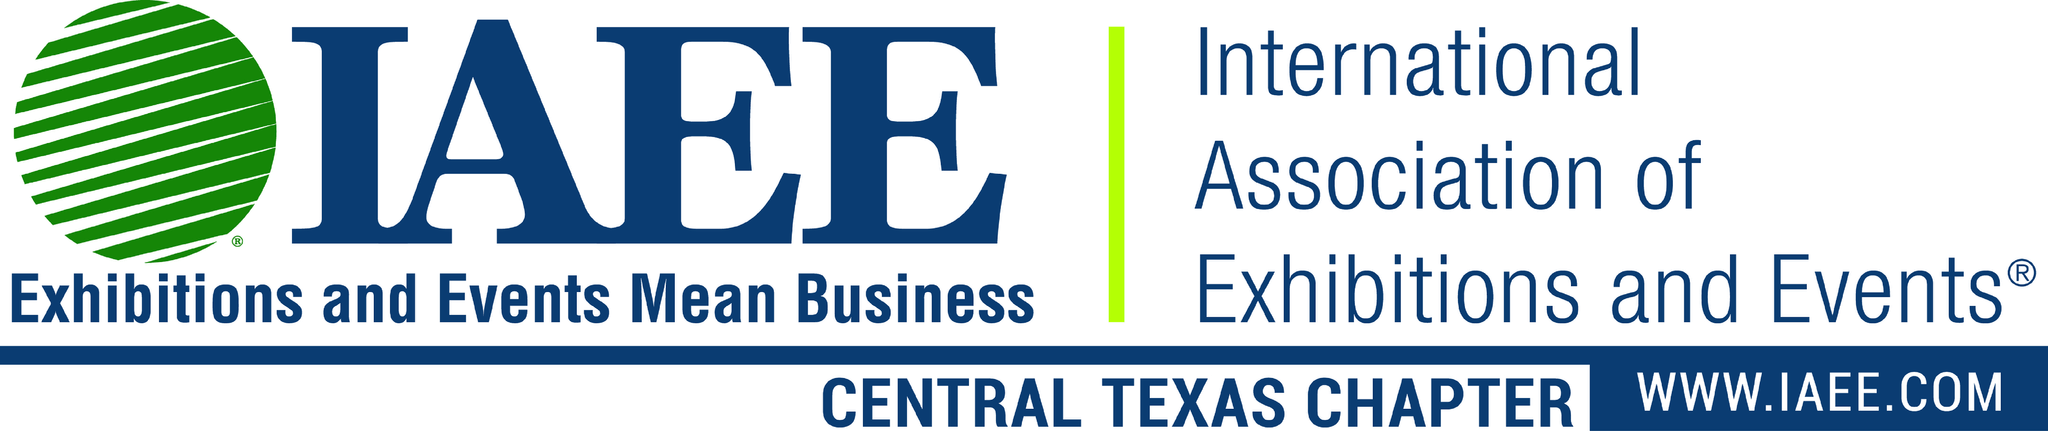 IAEE Central Texas Chapter